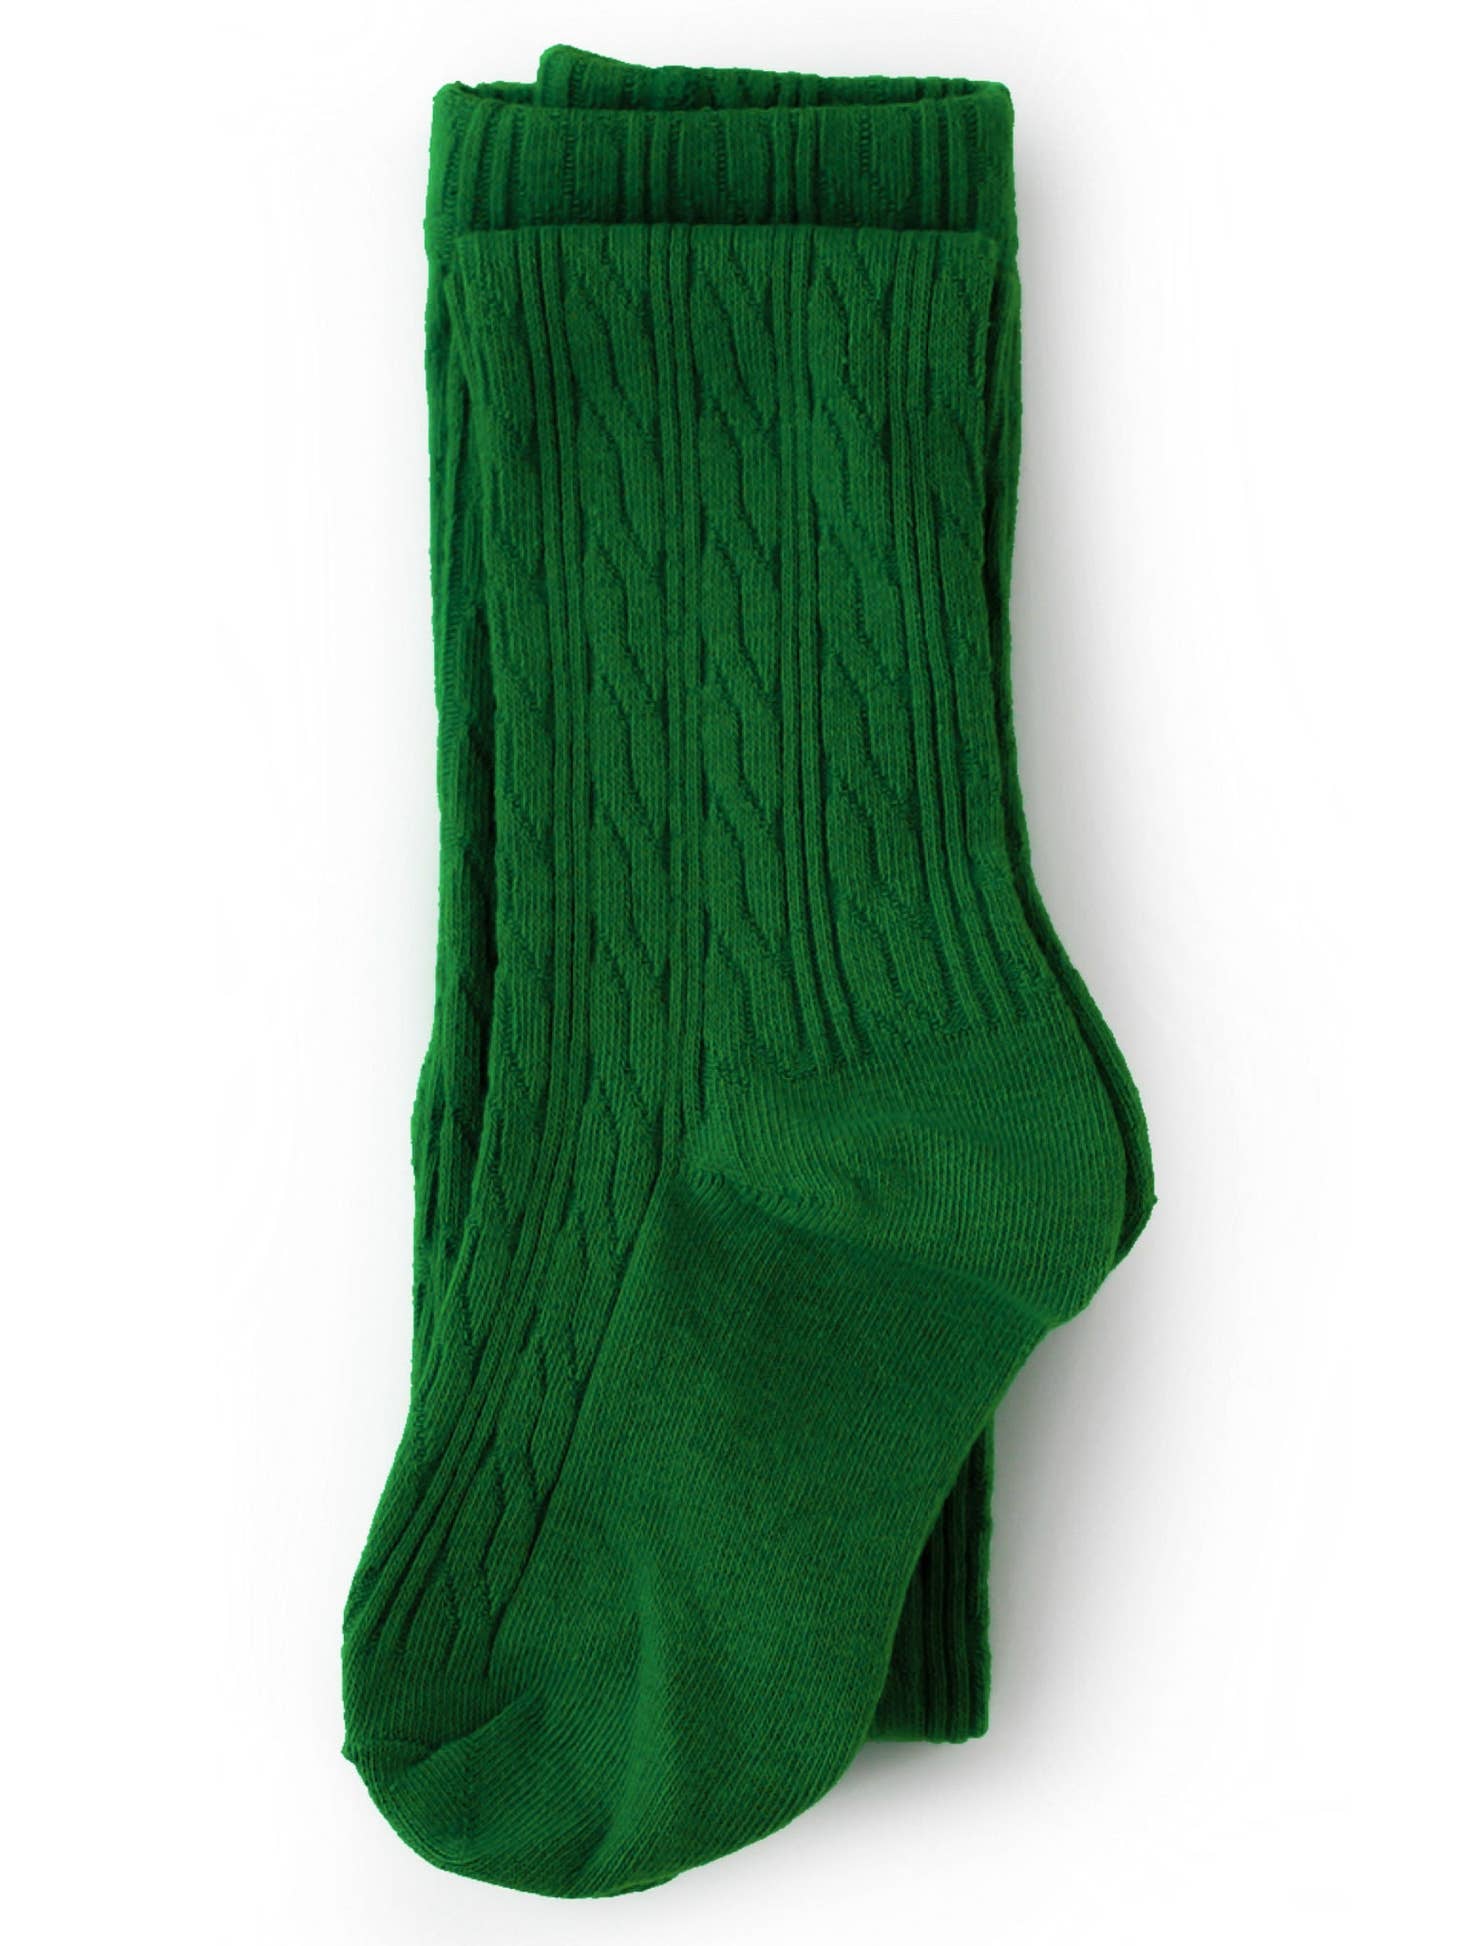 Little Stocking Co.- NoBeL gReEn CaBLe KnIt